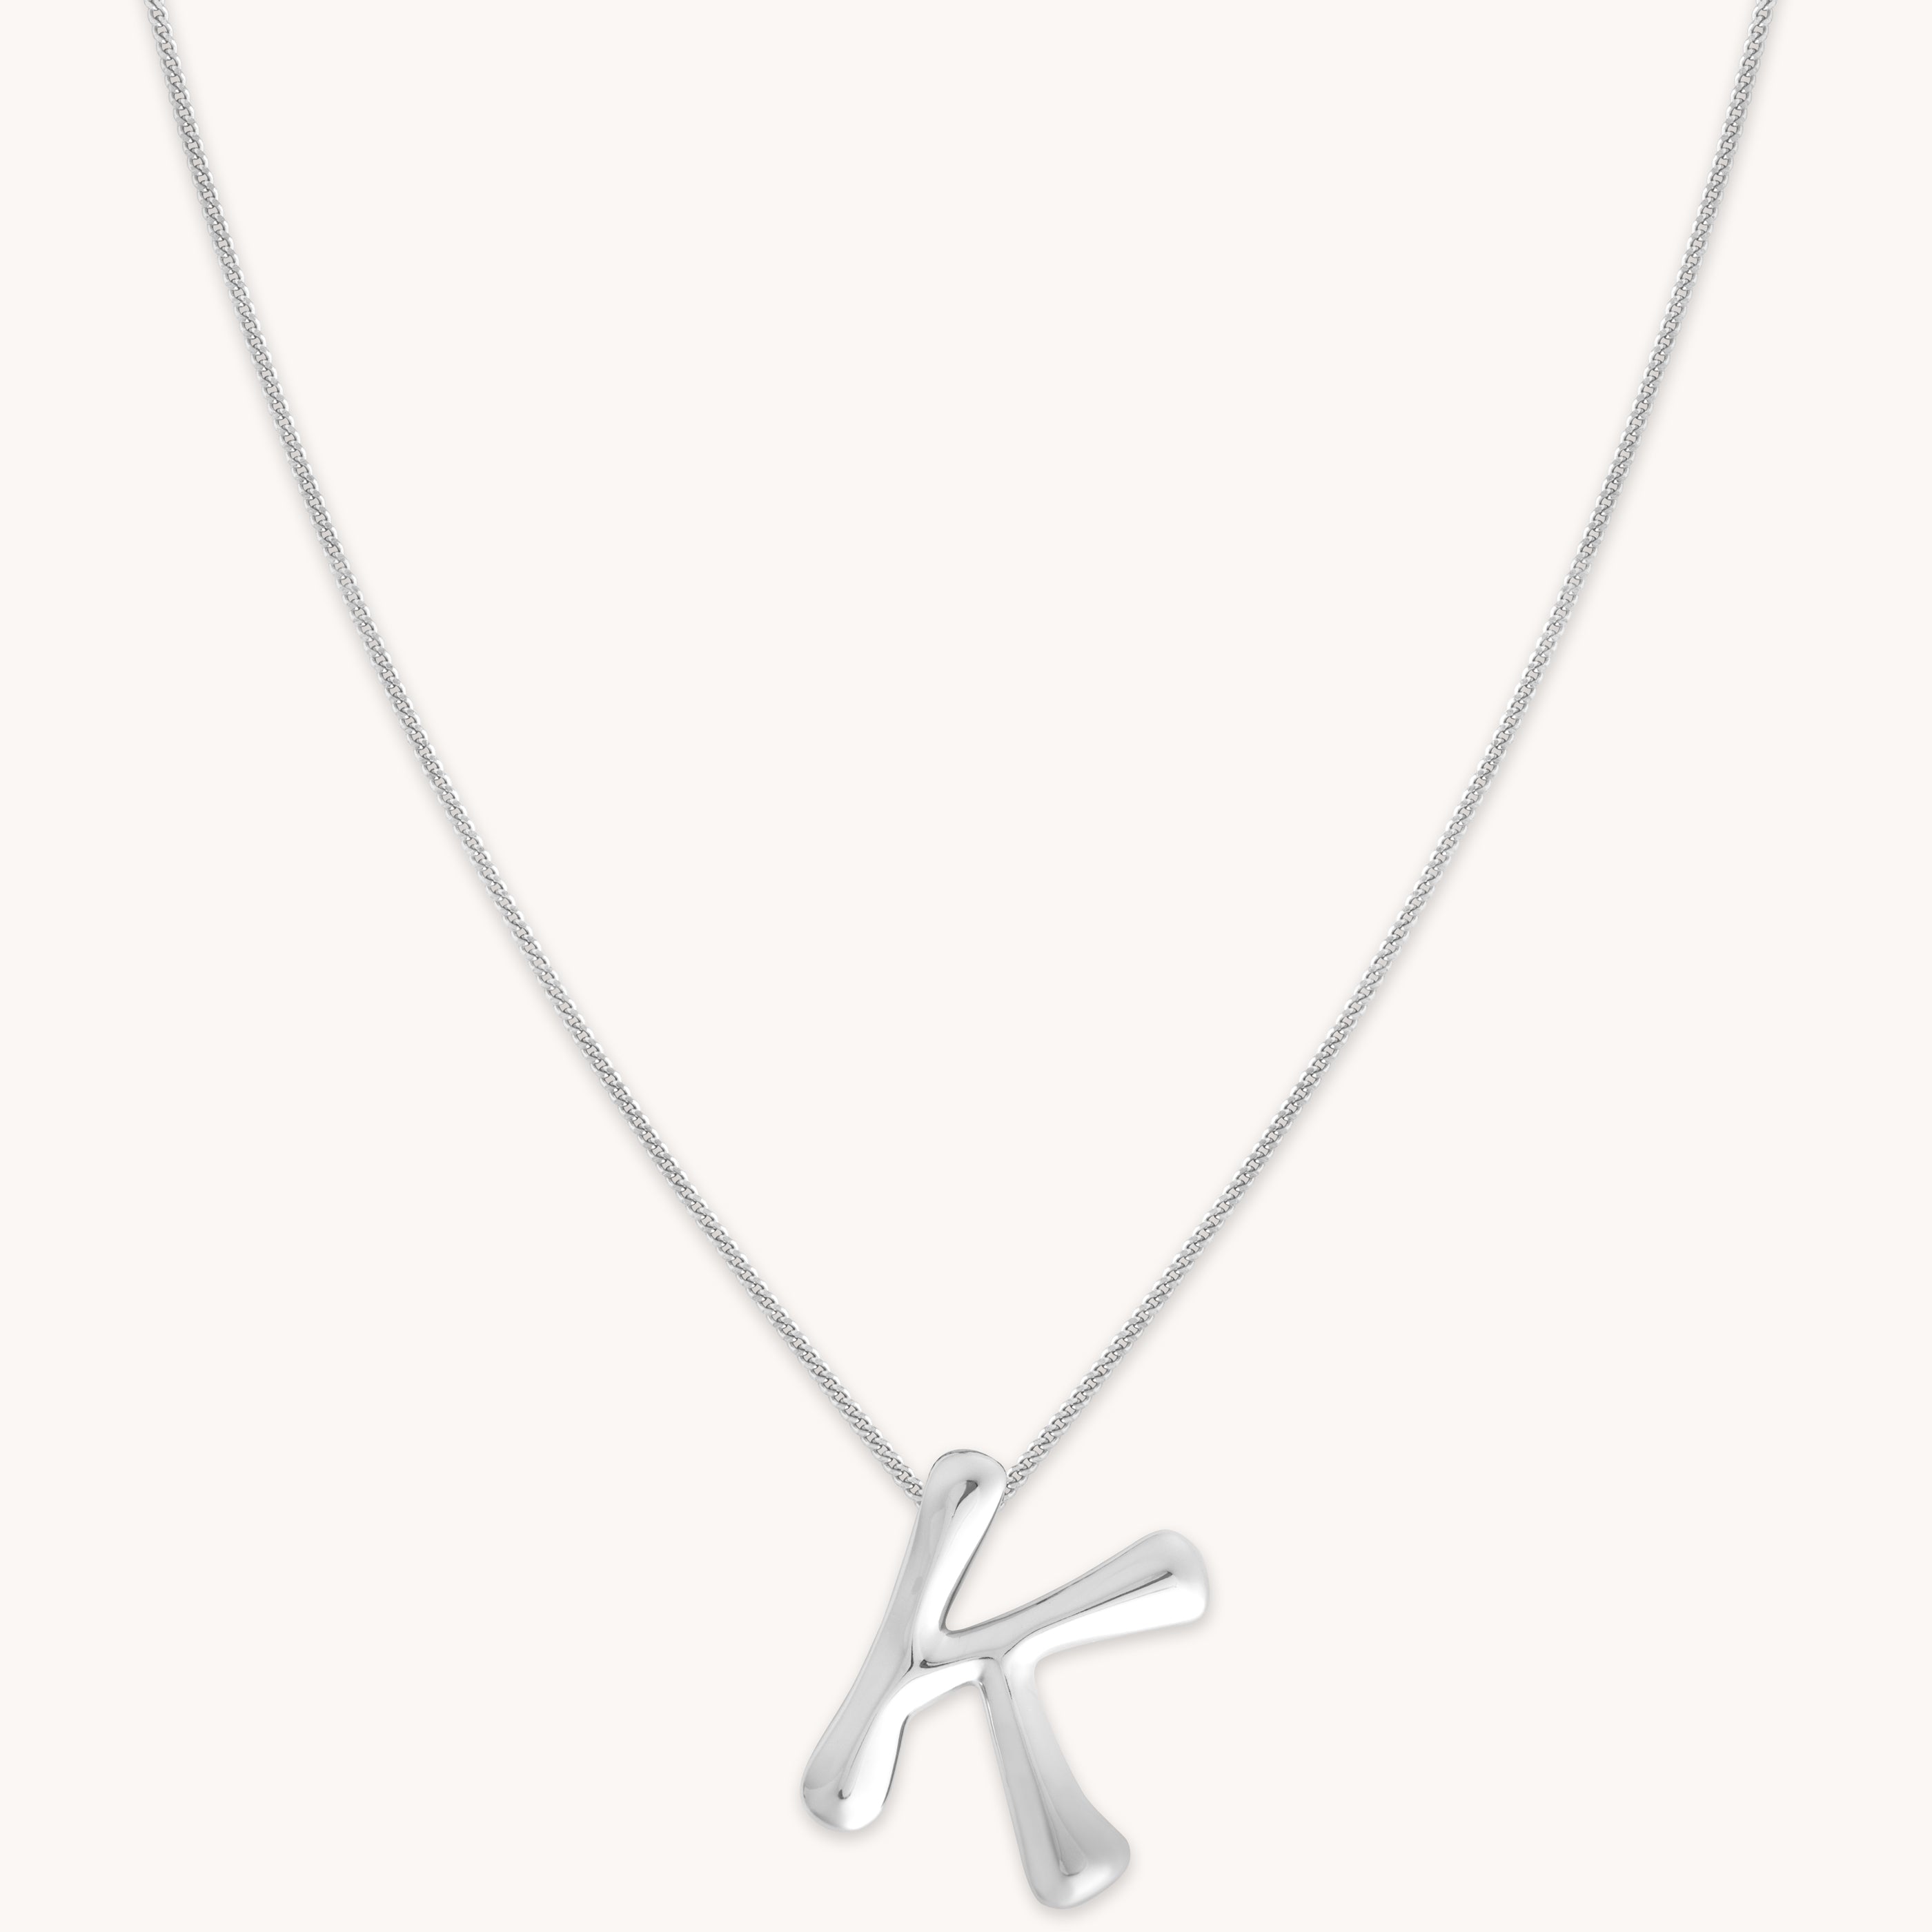 K Initial Bold Pendant Necklace in Silver